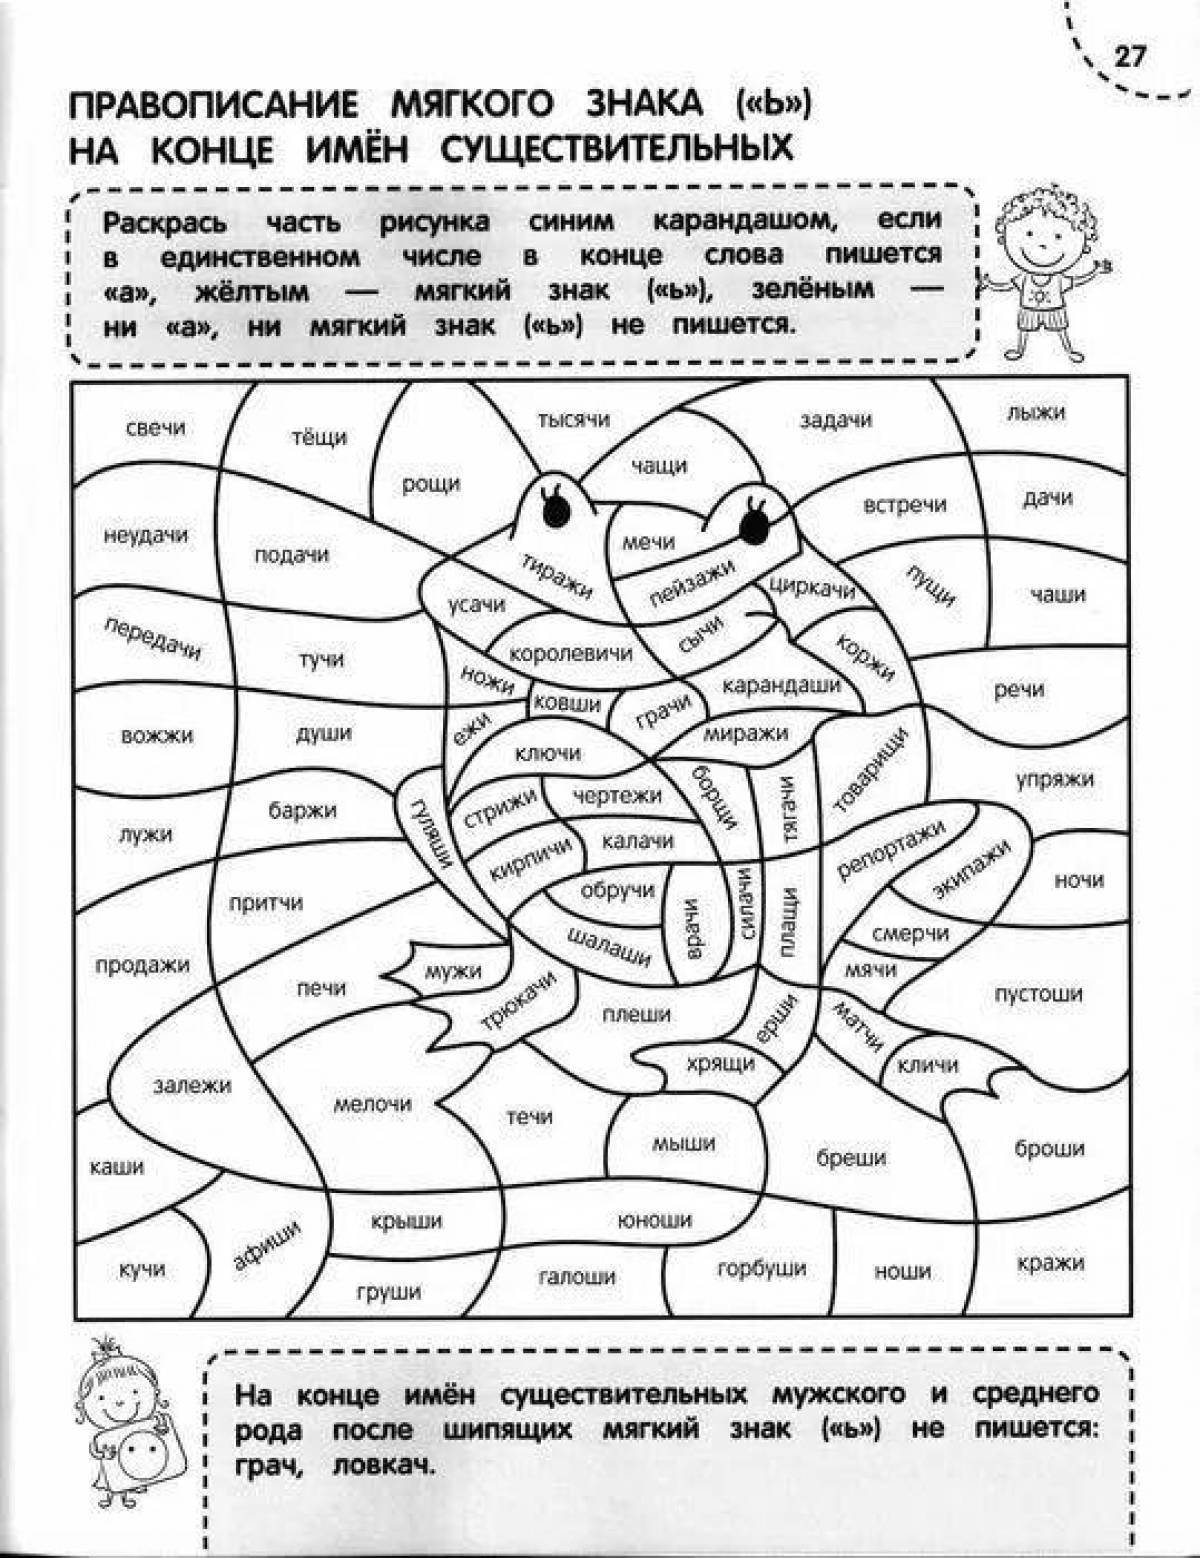 Creative cases coloring pages grade 3